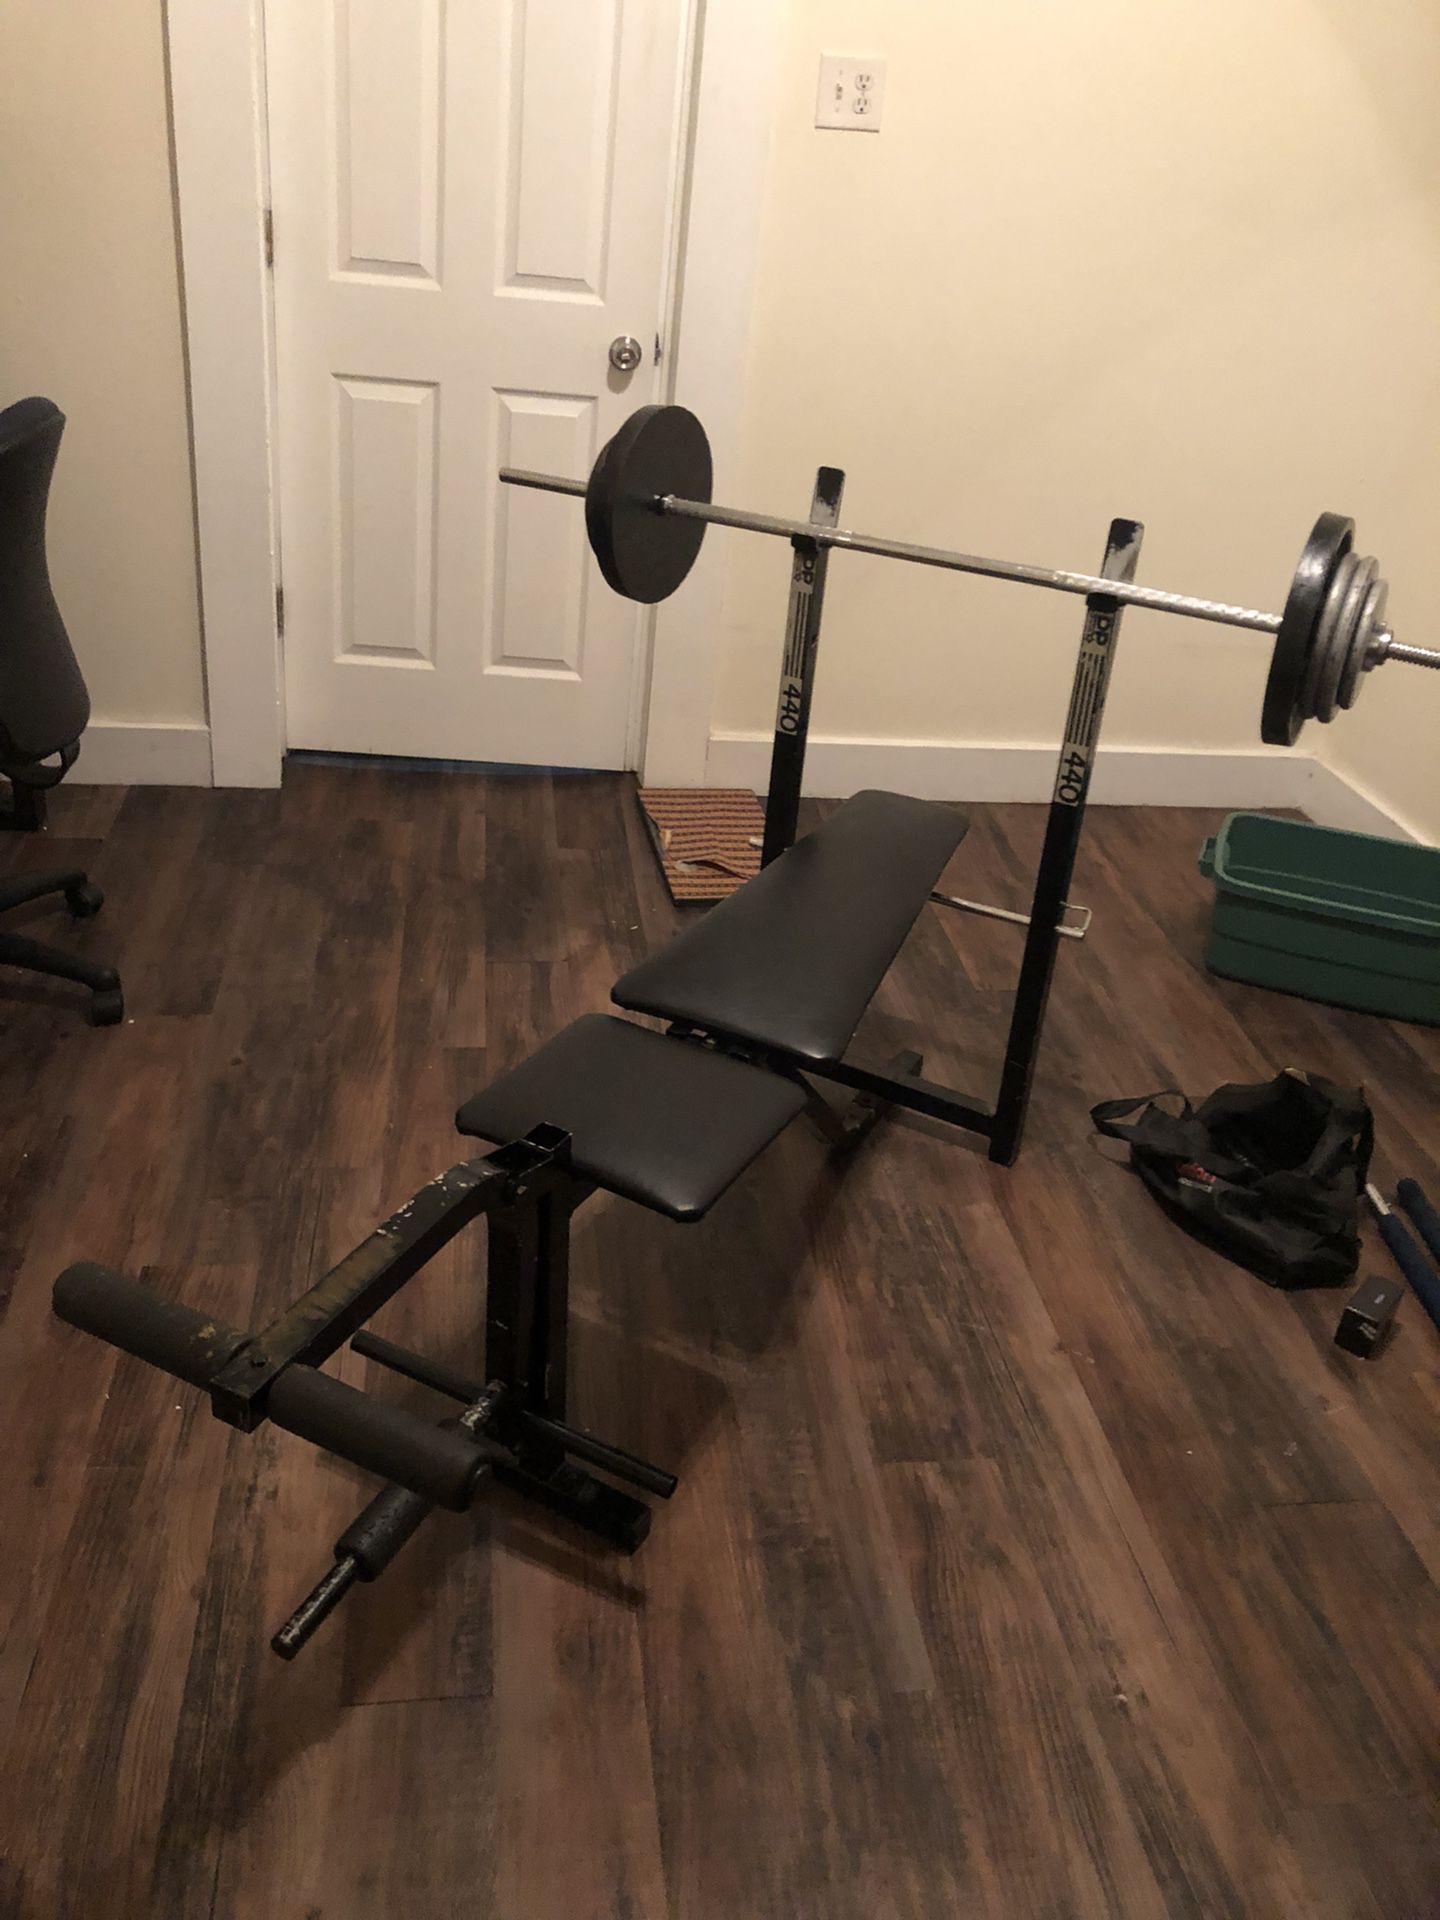 Bench Press With 140lbs Weights and Bars